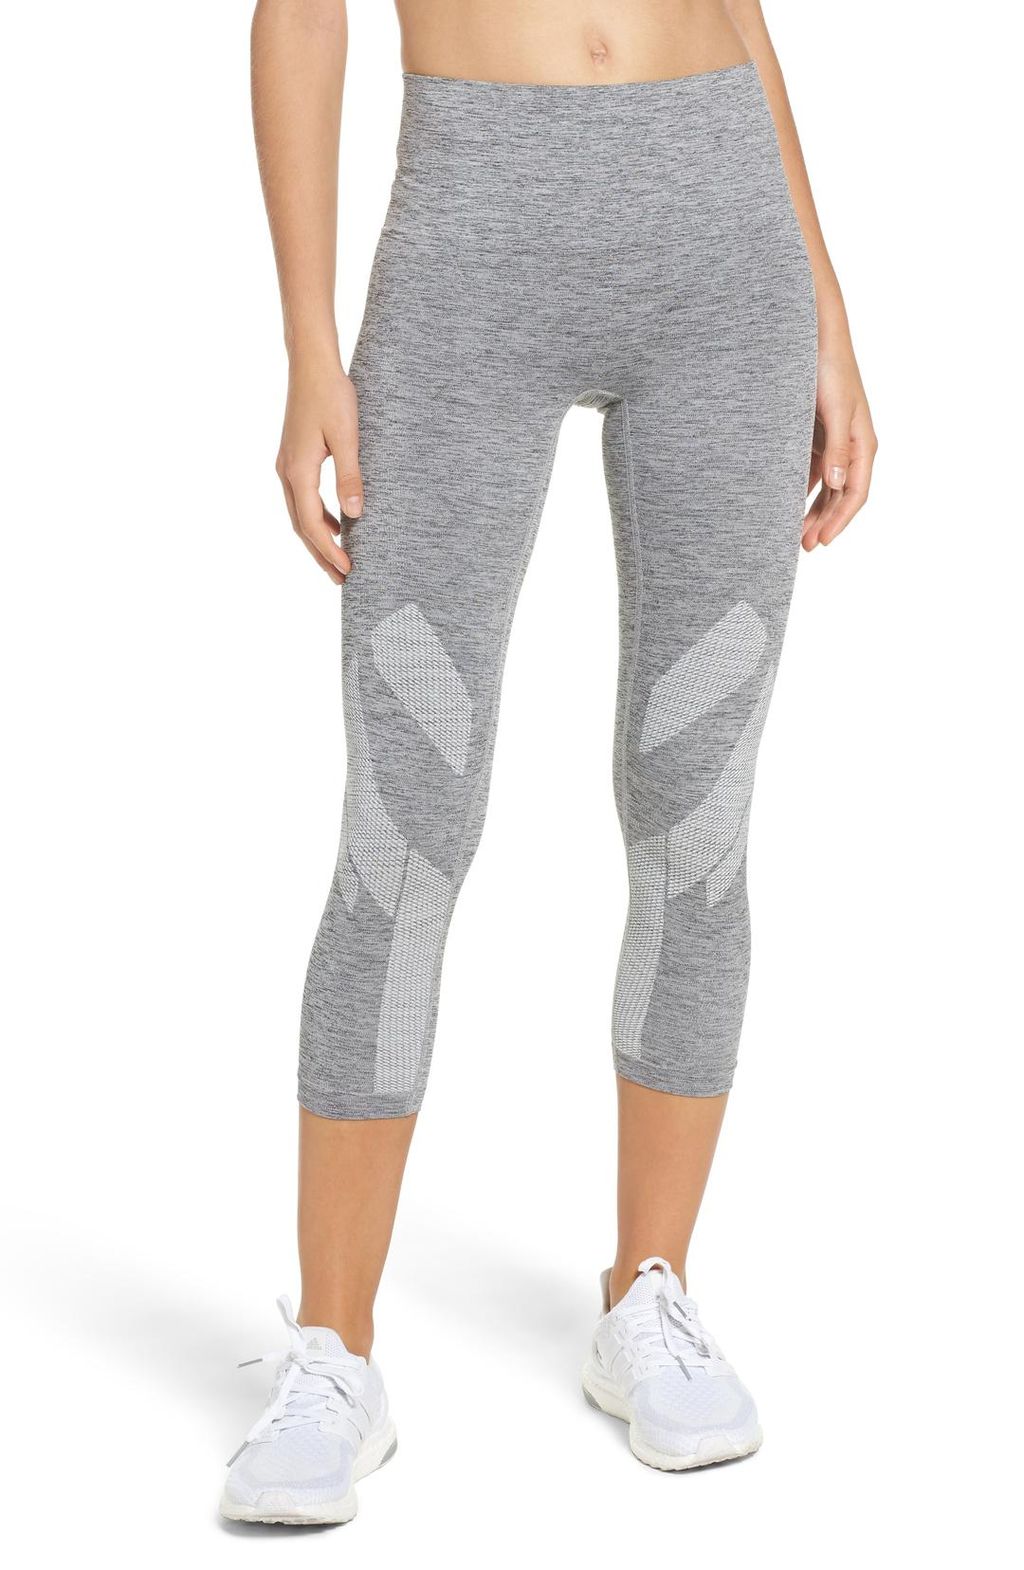 16 Seamless Leggings to Avoid Chafing | Who What Wear